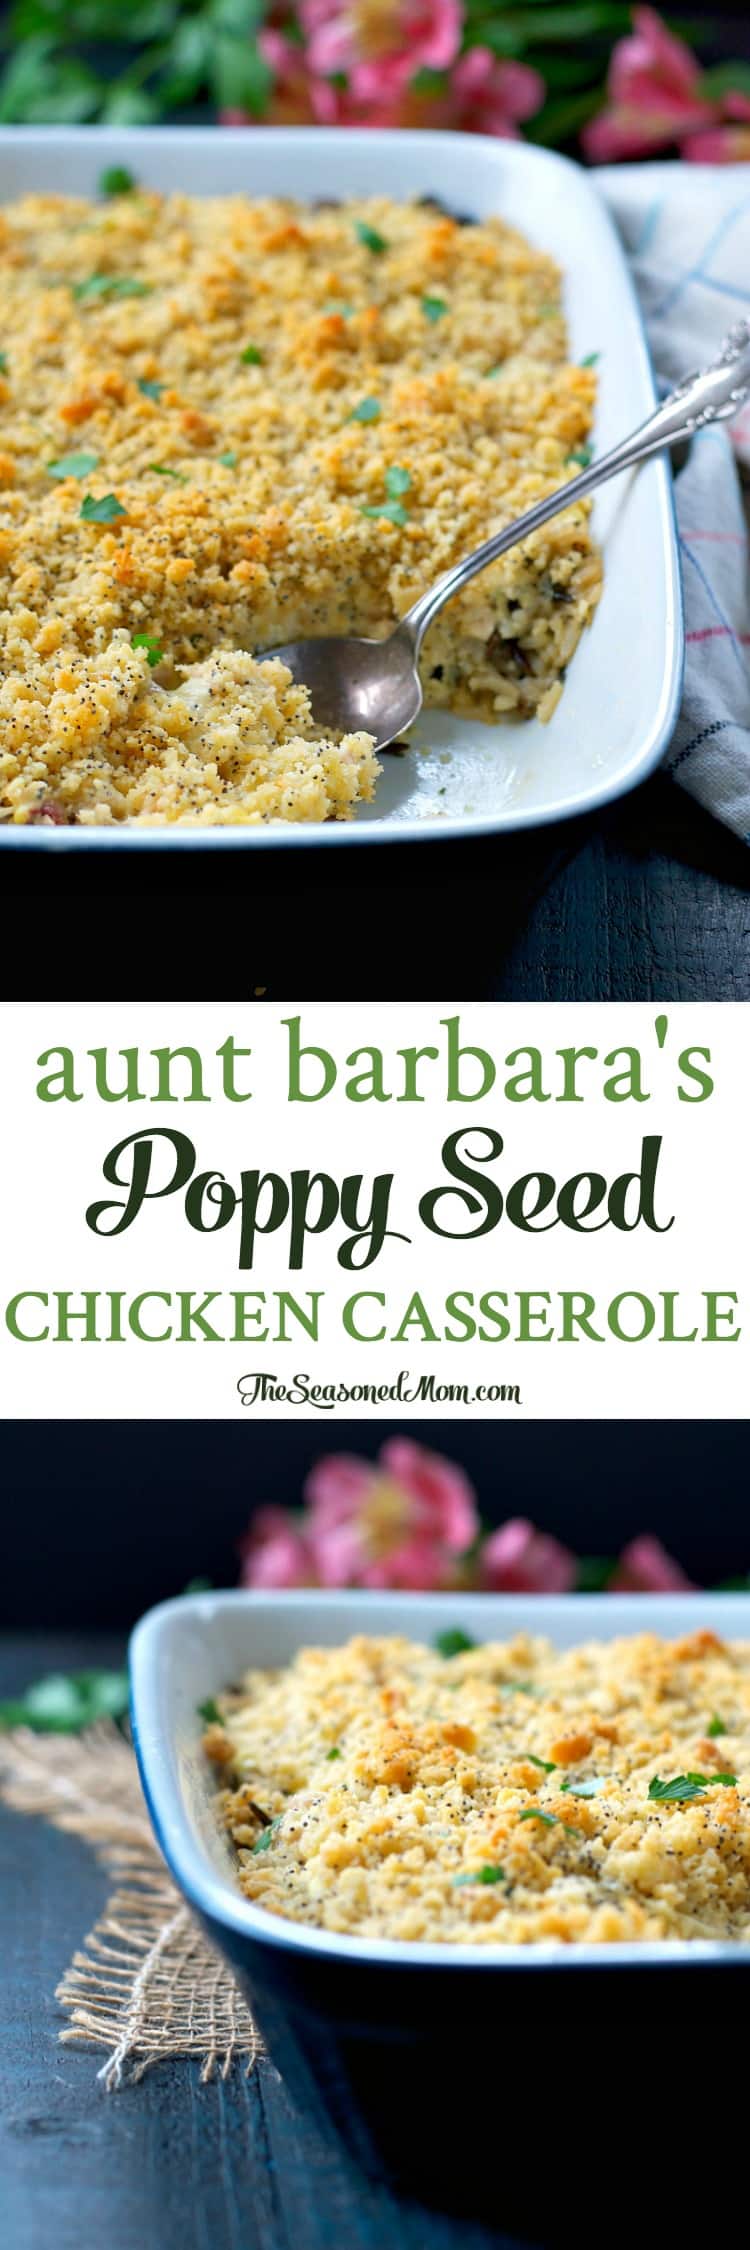 Aunt Barbara's Poppy Seed Chicken Casserole is an easy dinner and a perfect comfort food freezer meal for busy weeknights!